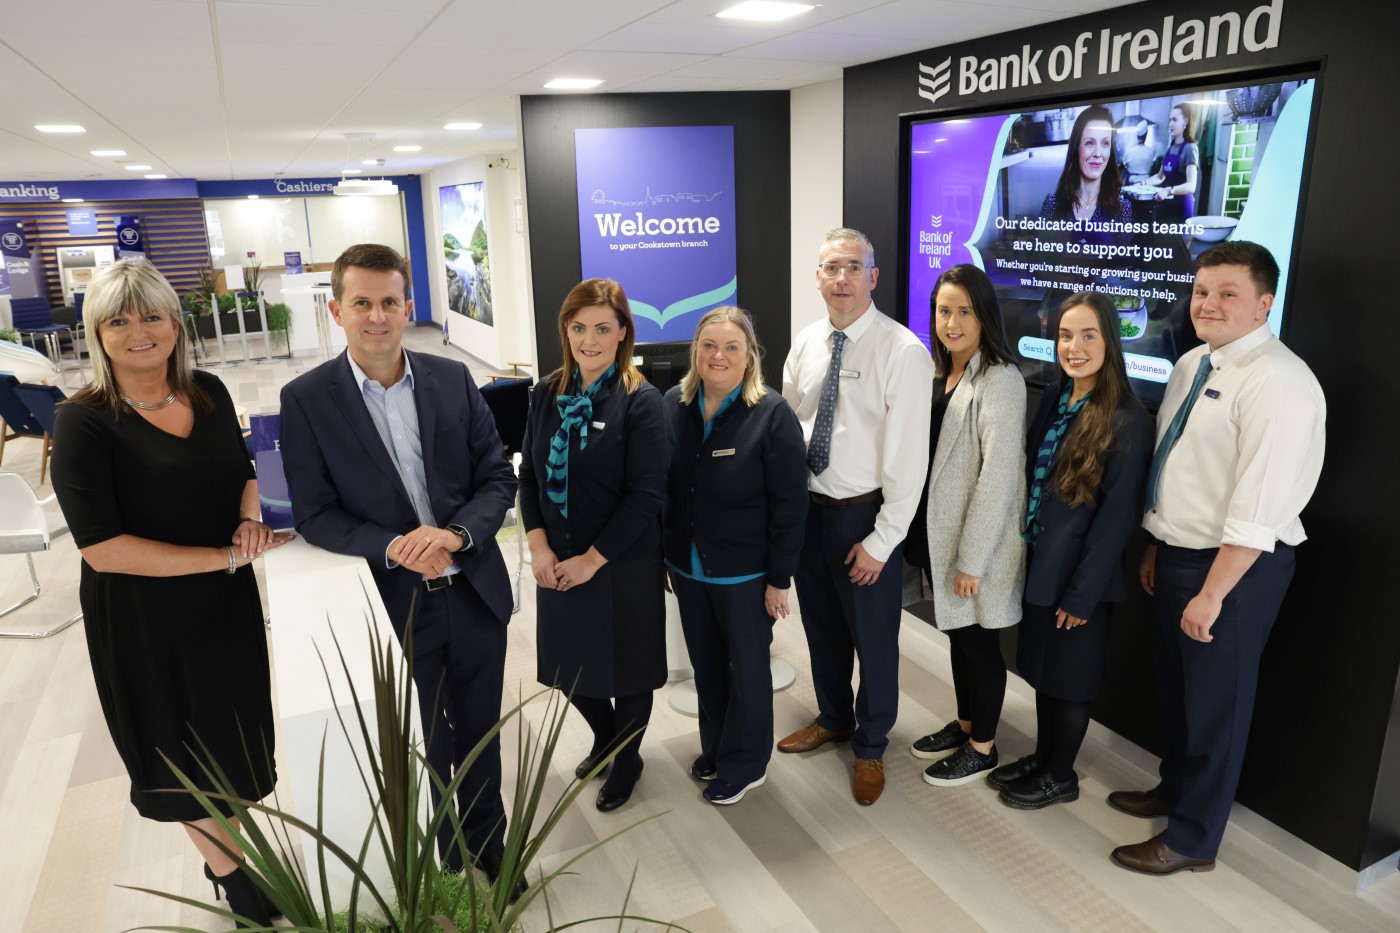 Cathal McKee (Branch Manager at Bank of Ireland Cookstown), William Thompson (Head of Consumer Banking NI at Bank of Ireland) with the Cookstown branch team